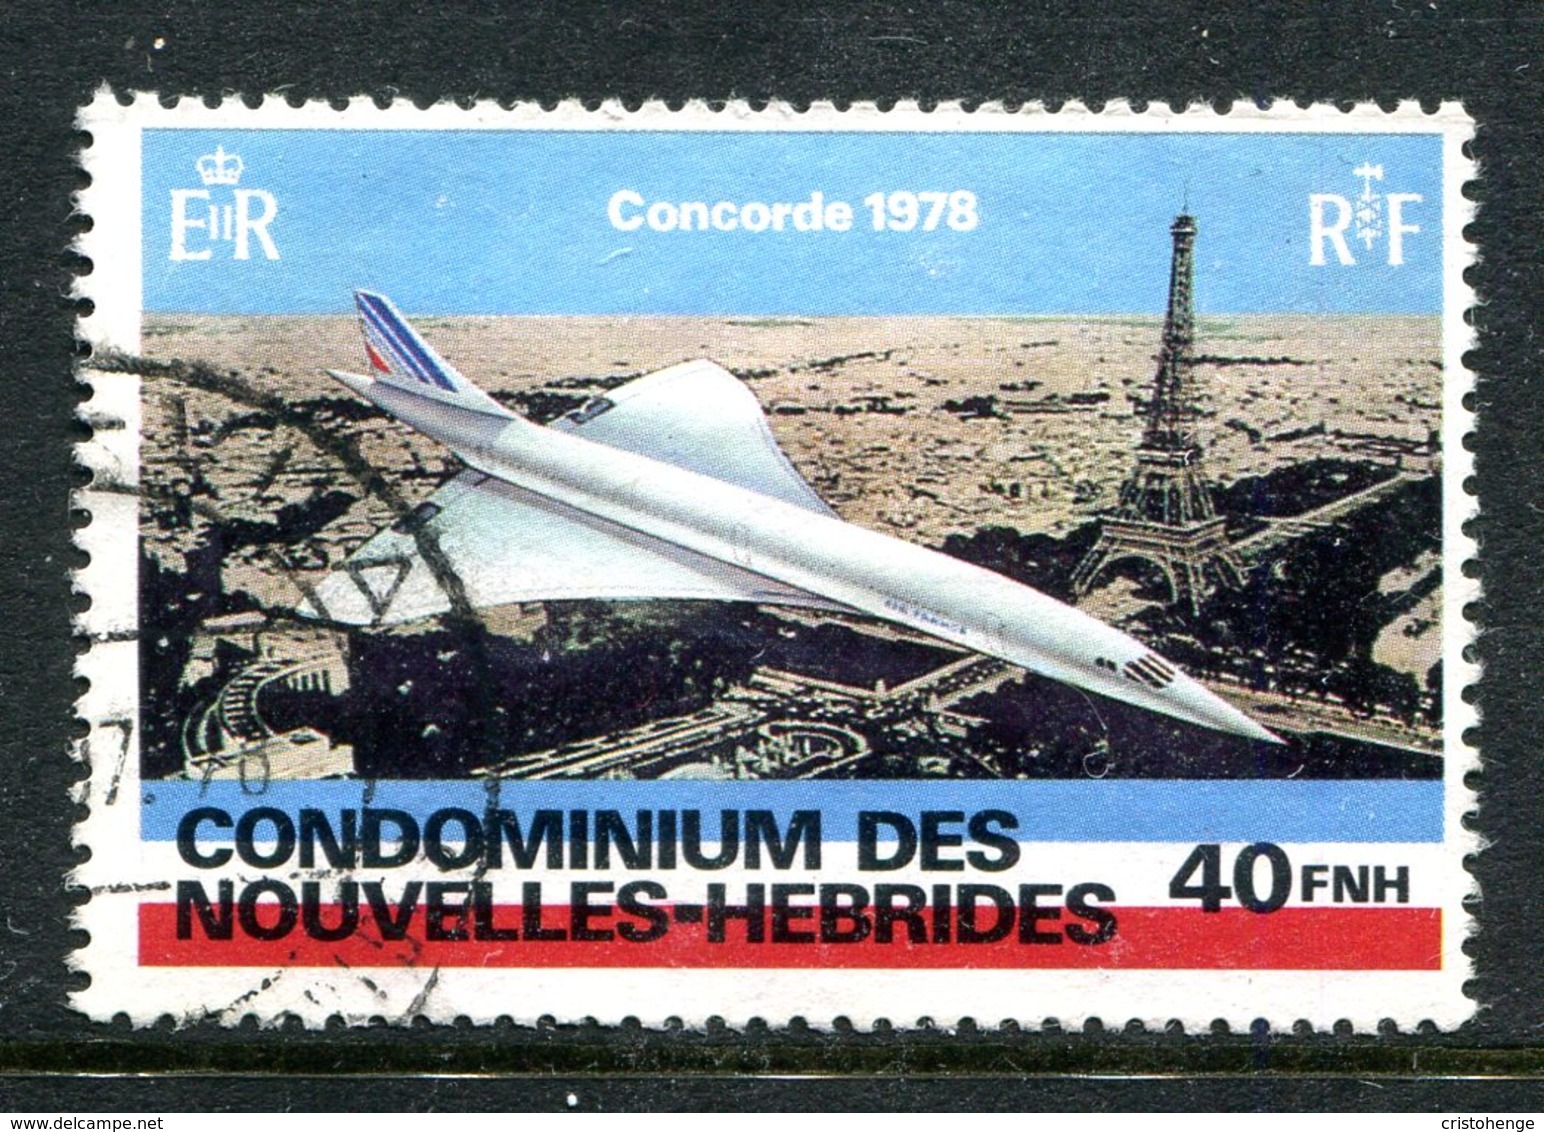 Nouvelles Hebrides 1978 Concorde Commemoration - 40f Value Used (SG F275) - Used Stamps